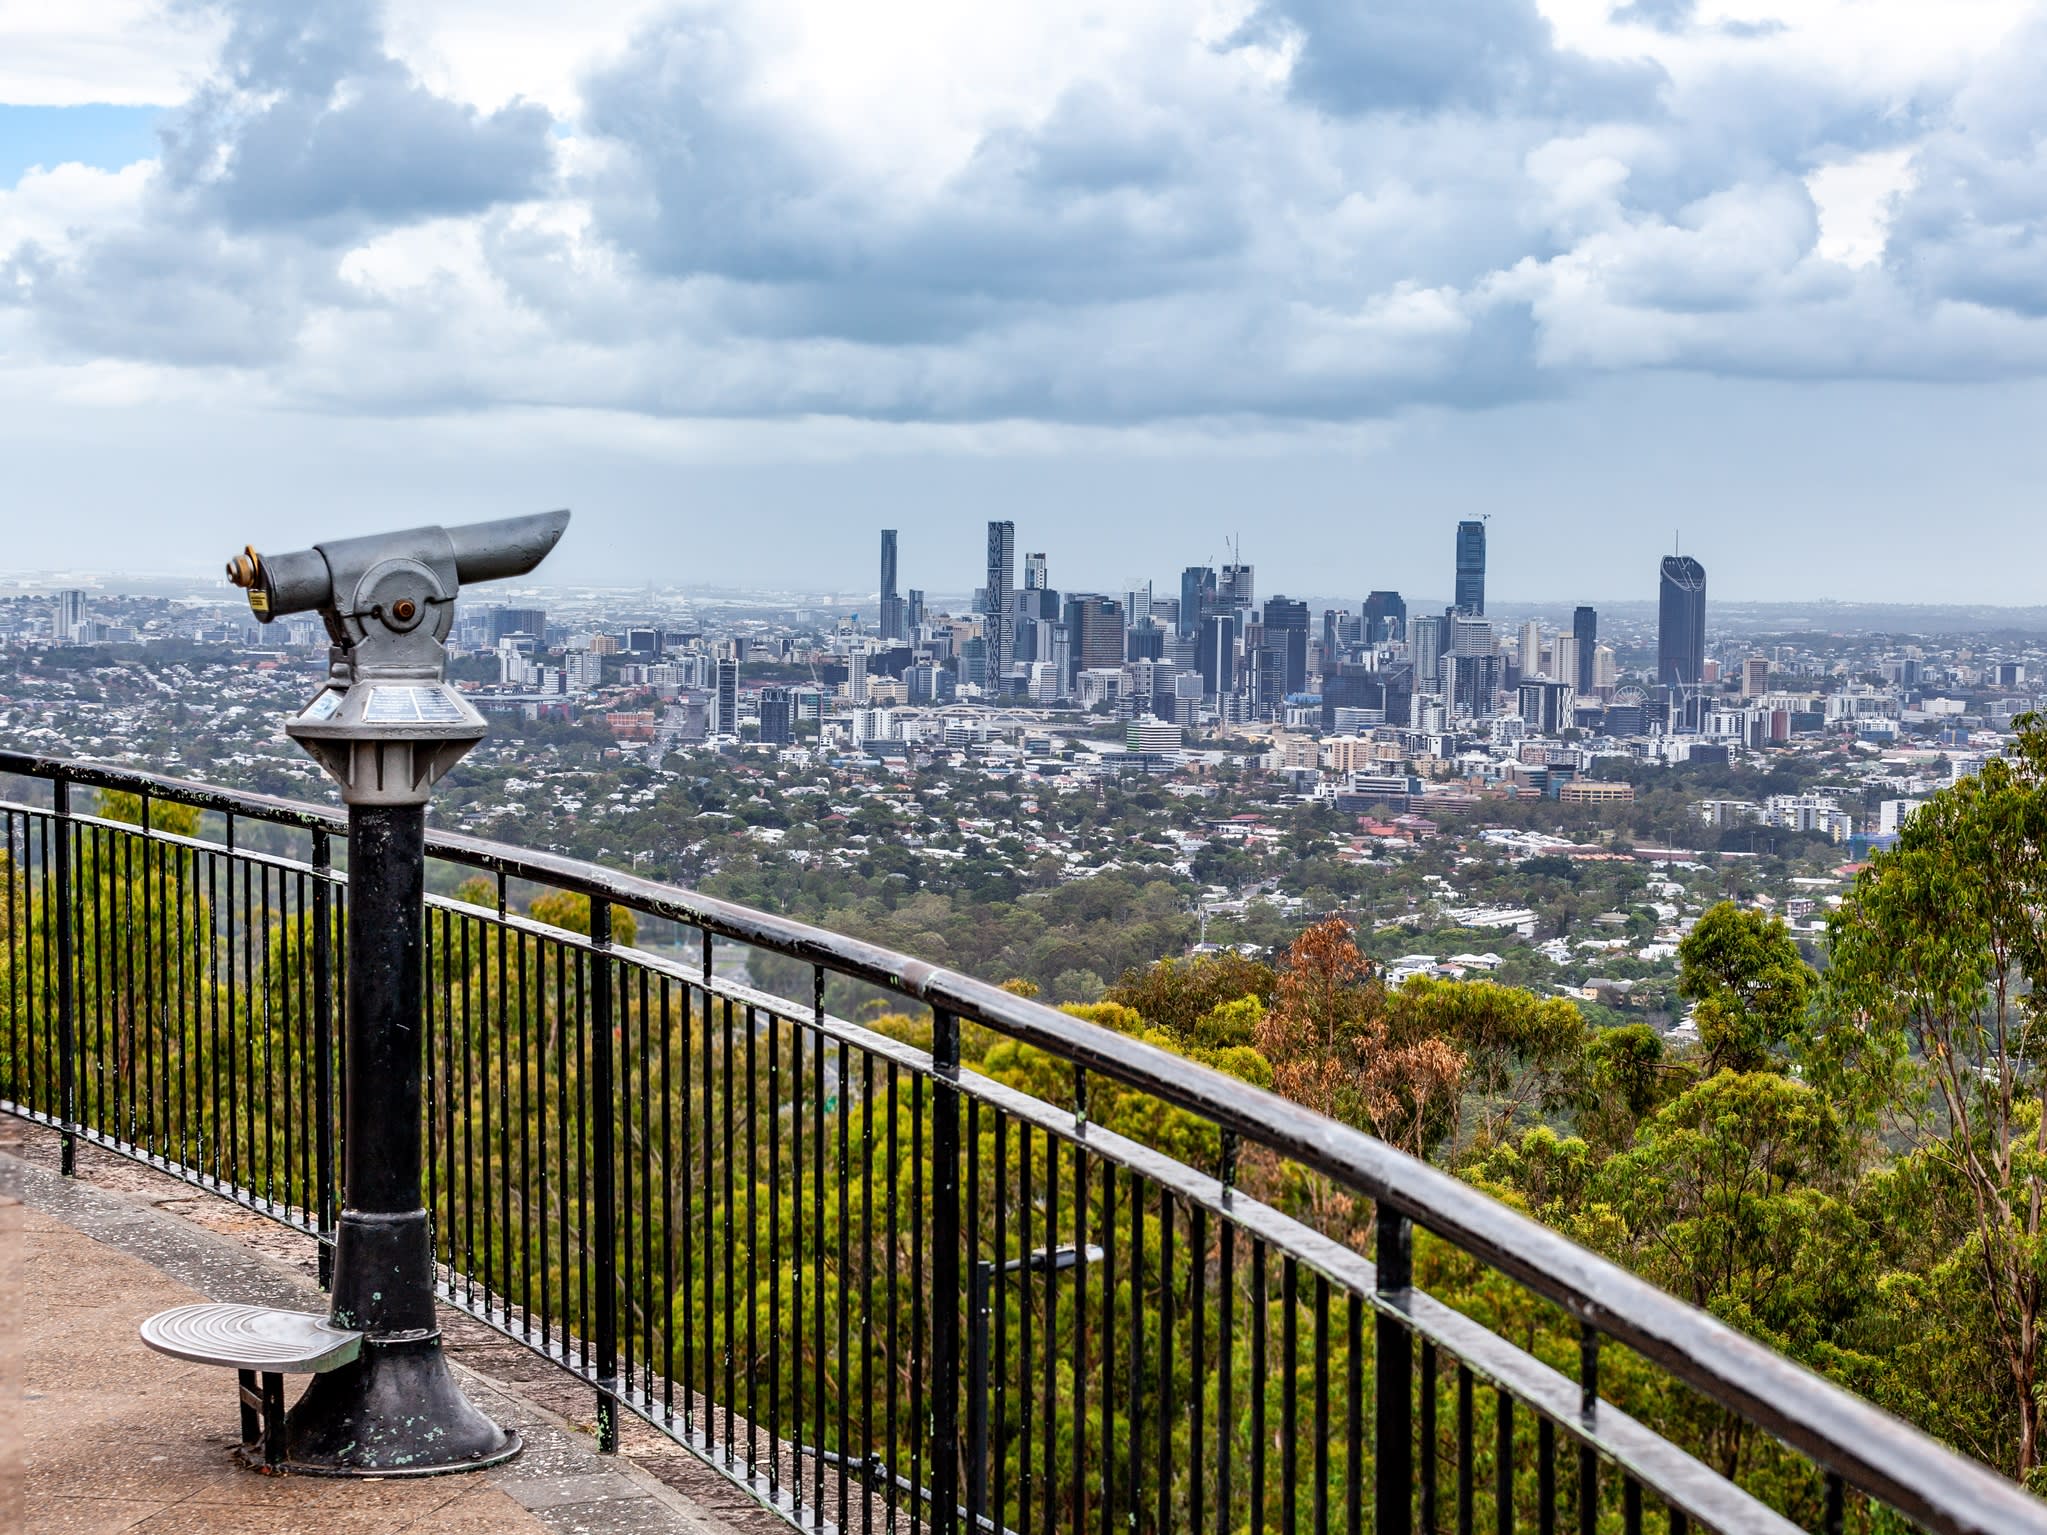 Brisbane Half Day Tour with Mount Coot-tha Lookout and XXXX Brewery Visit tours, activities, fun things to do in Brisbane(Australia)｜VELTRA